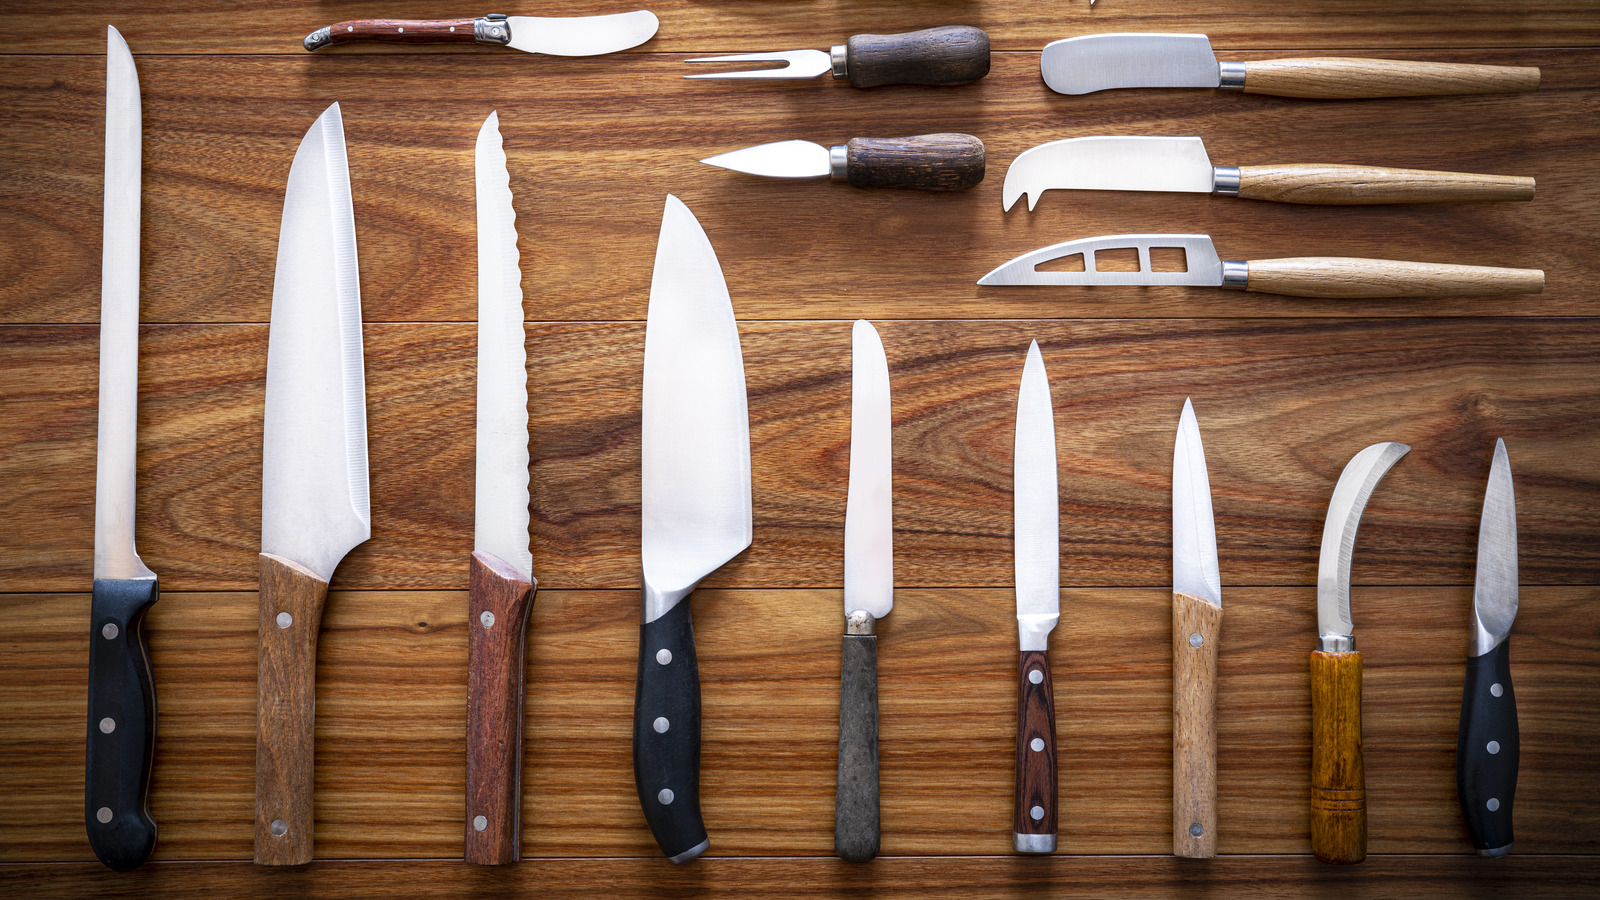 https://www.foodrepublic.com/img/gallery/the-only-3-knives-you-need-in-your-kitchen-arsenal/l-intro-1695290692.jpg